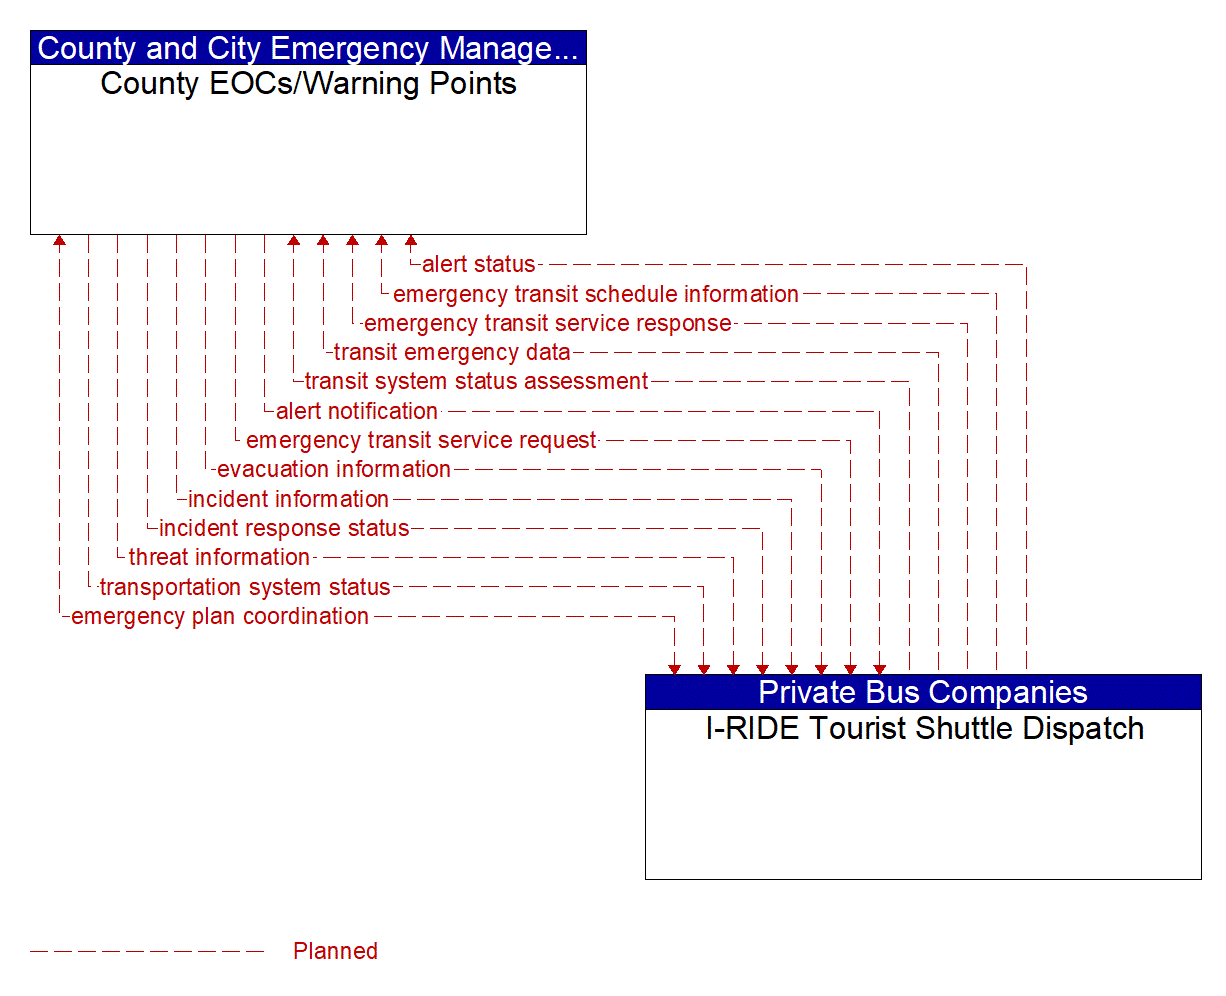 Architecture Flow Diagram: I-RIDE Tourist Shuttle Dispatch <--> County EOCs/Warning Points